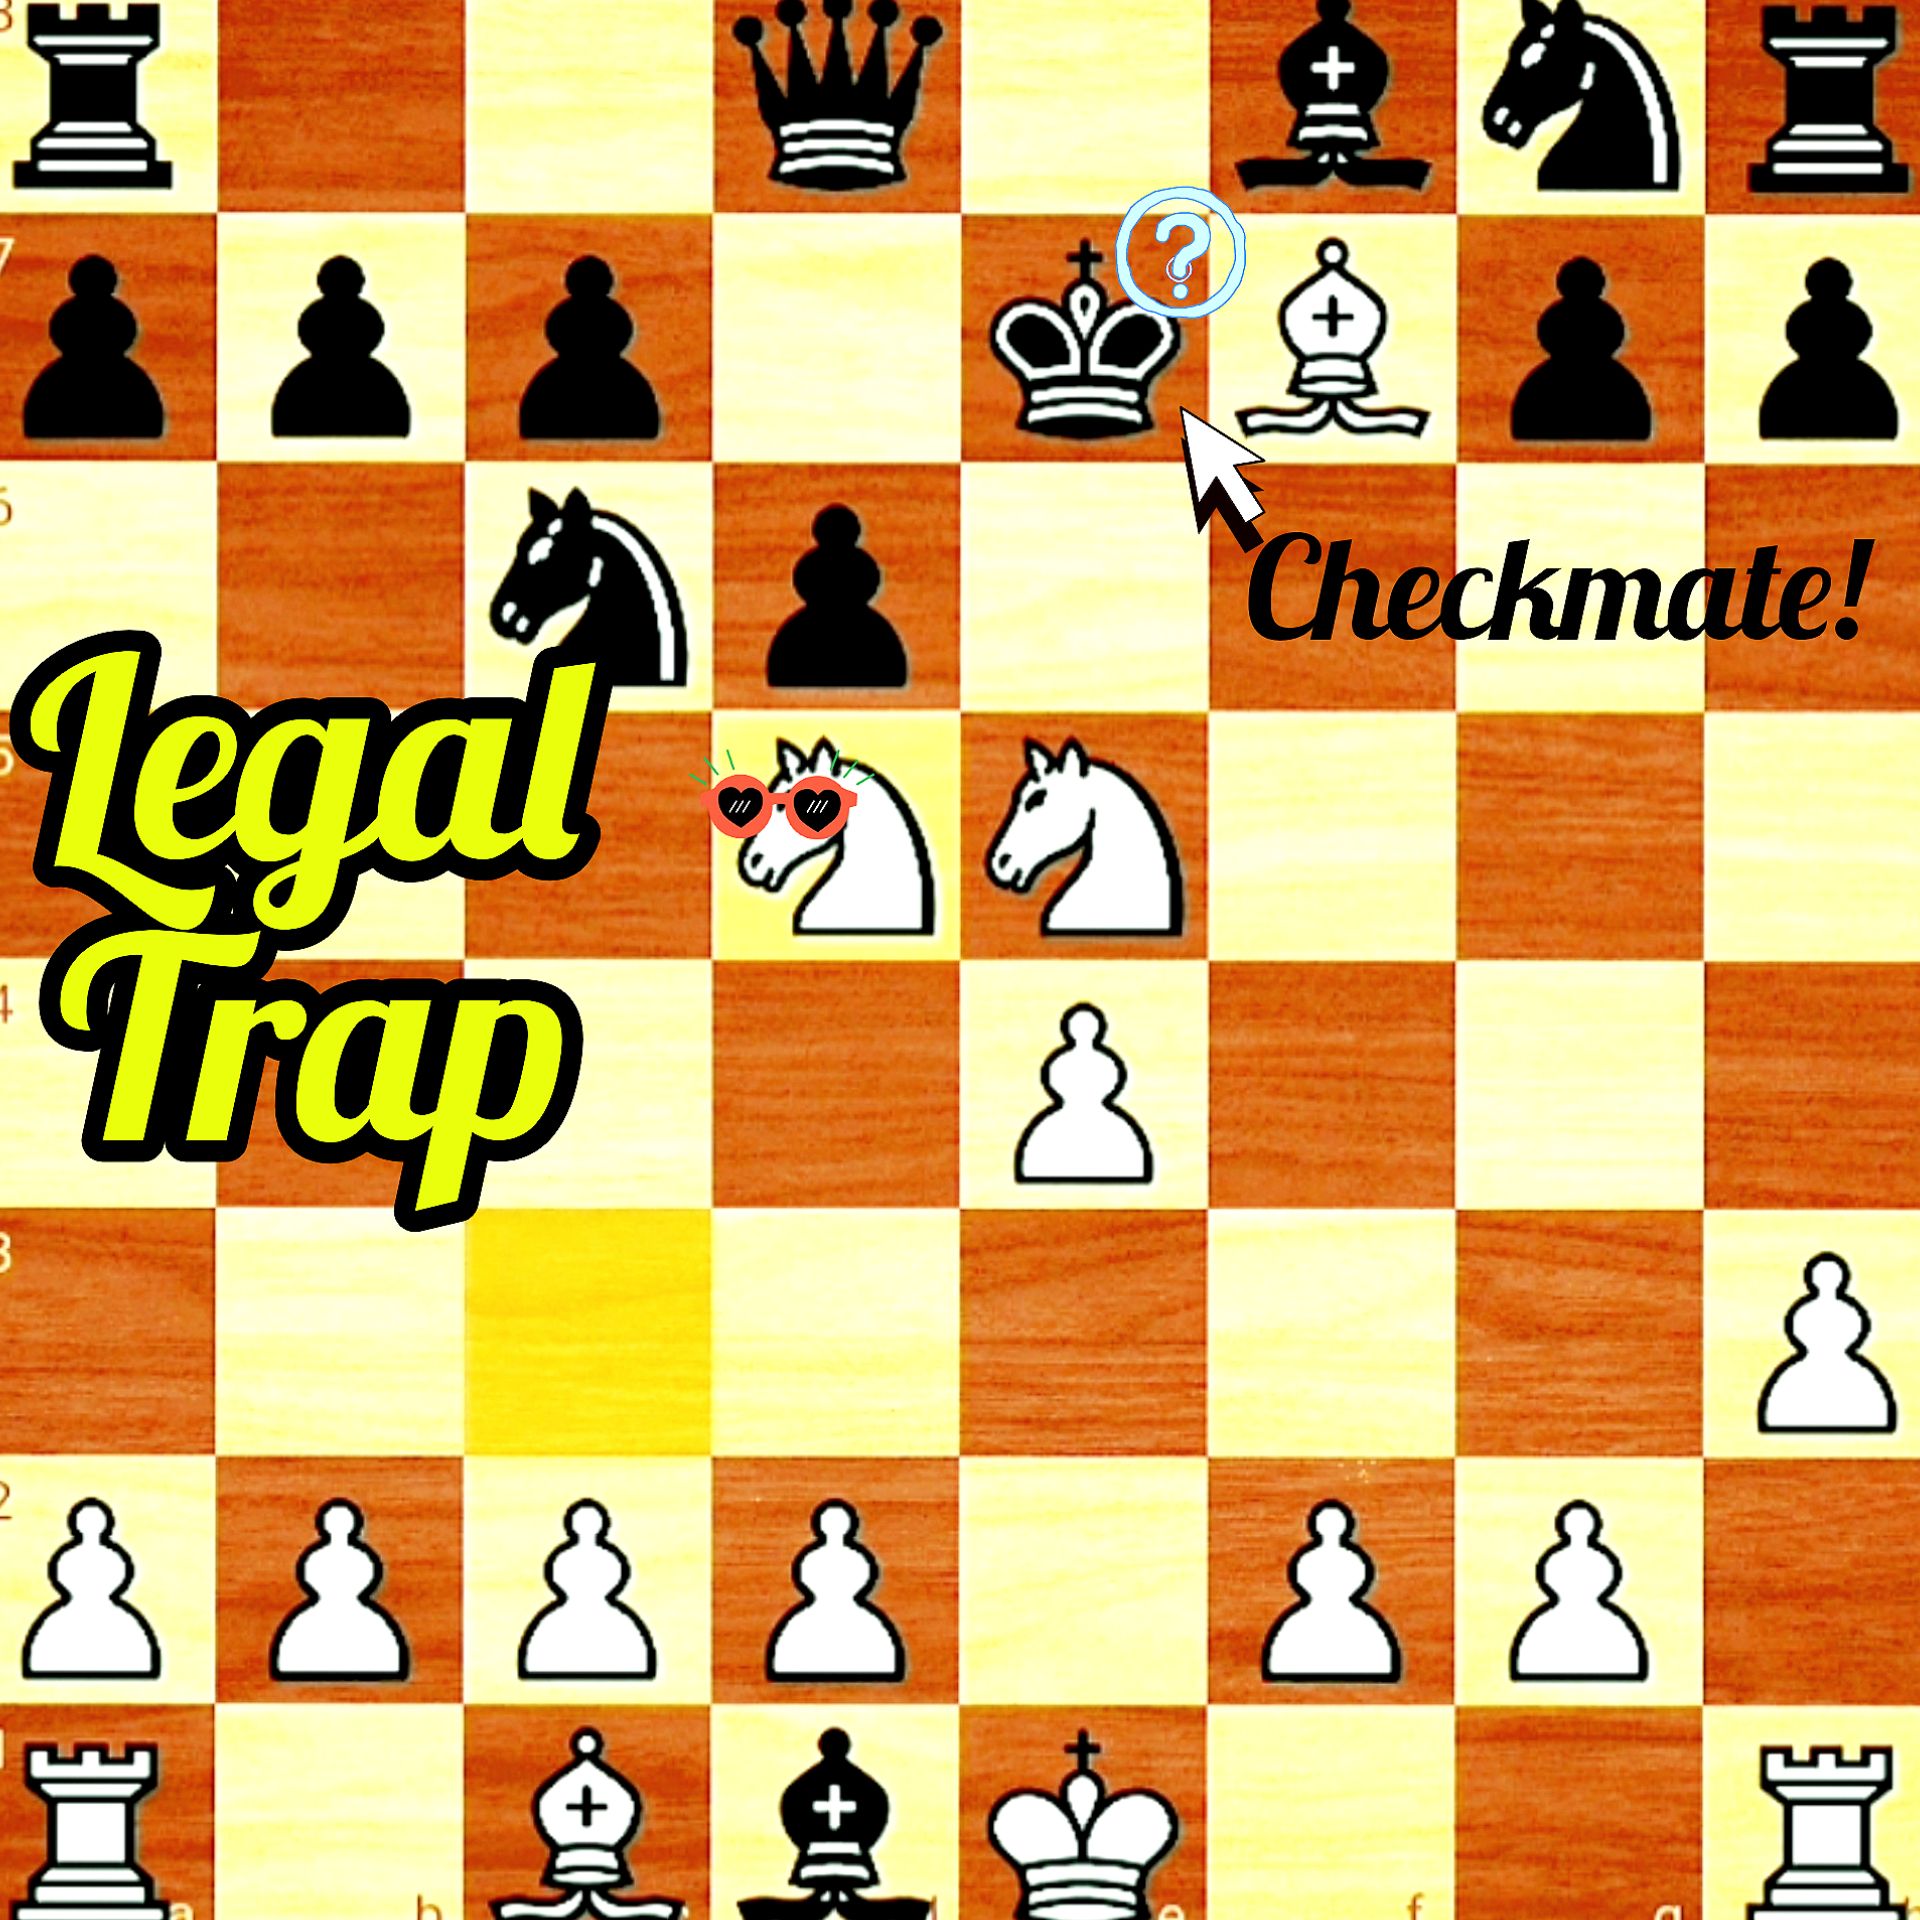 Every Opening Trap To Crush Your Opponent - Chess Lessons